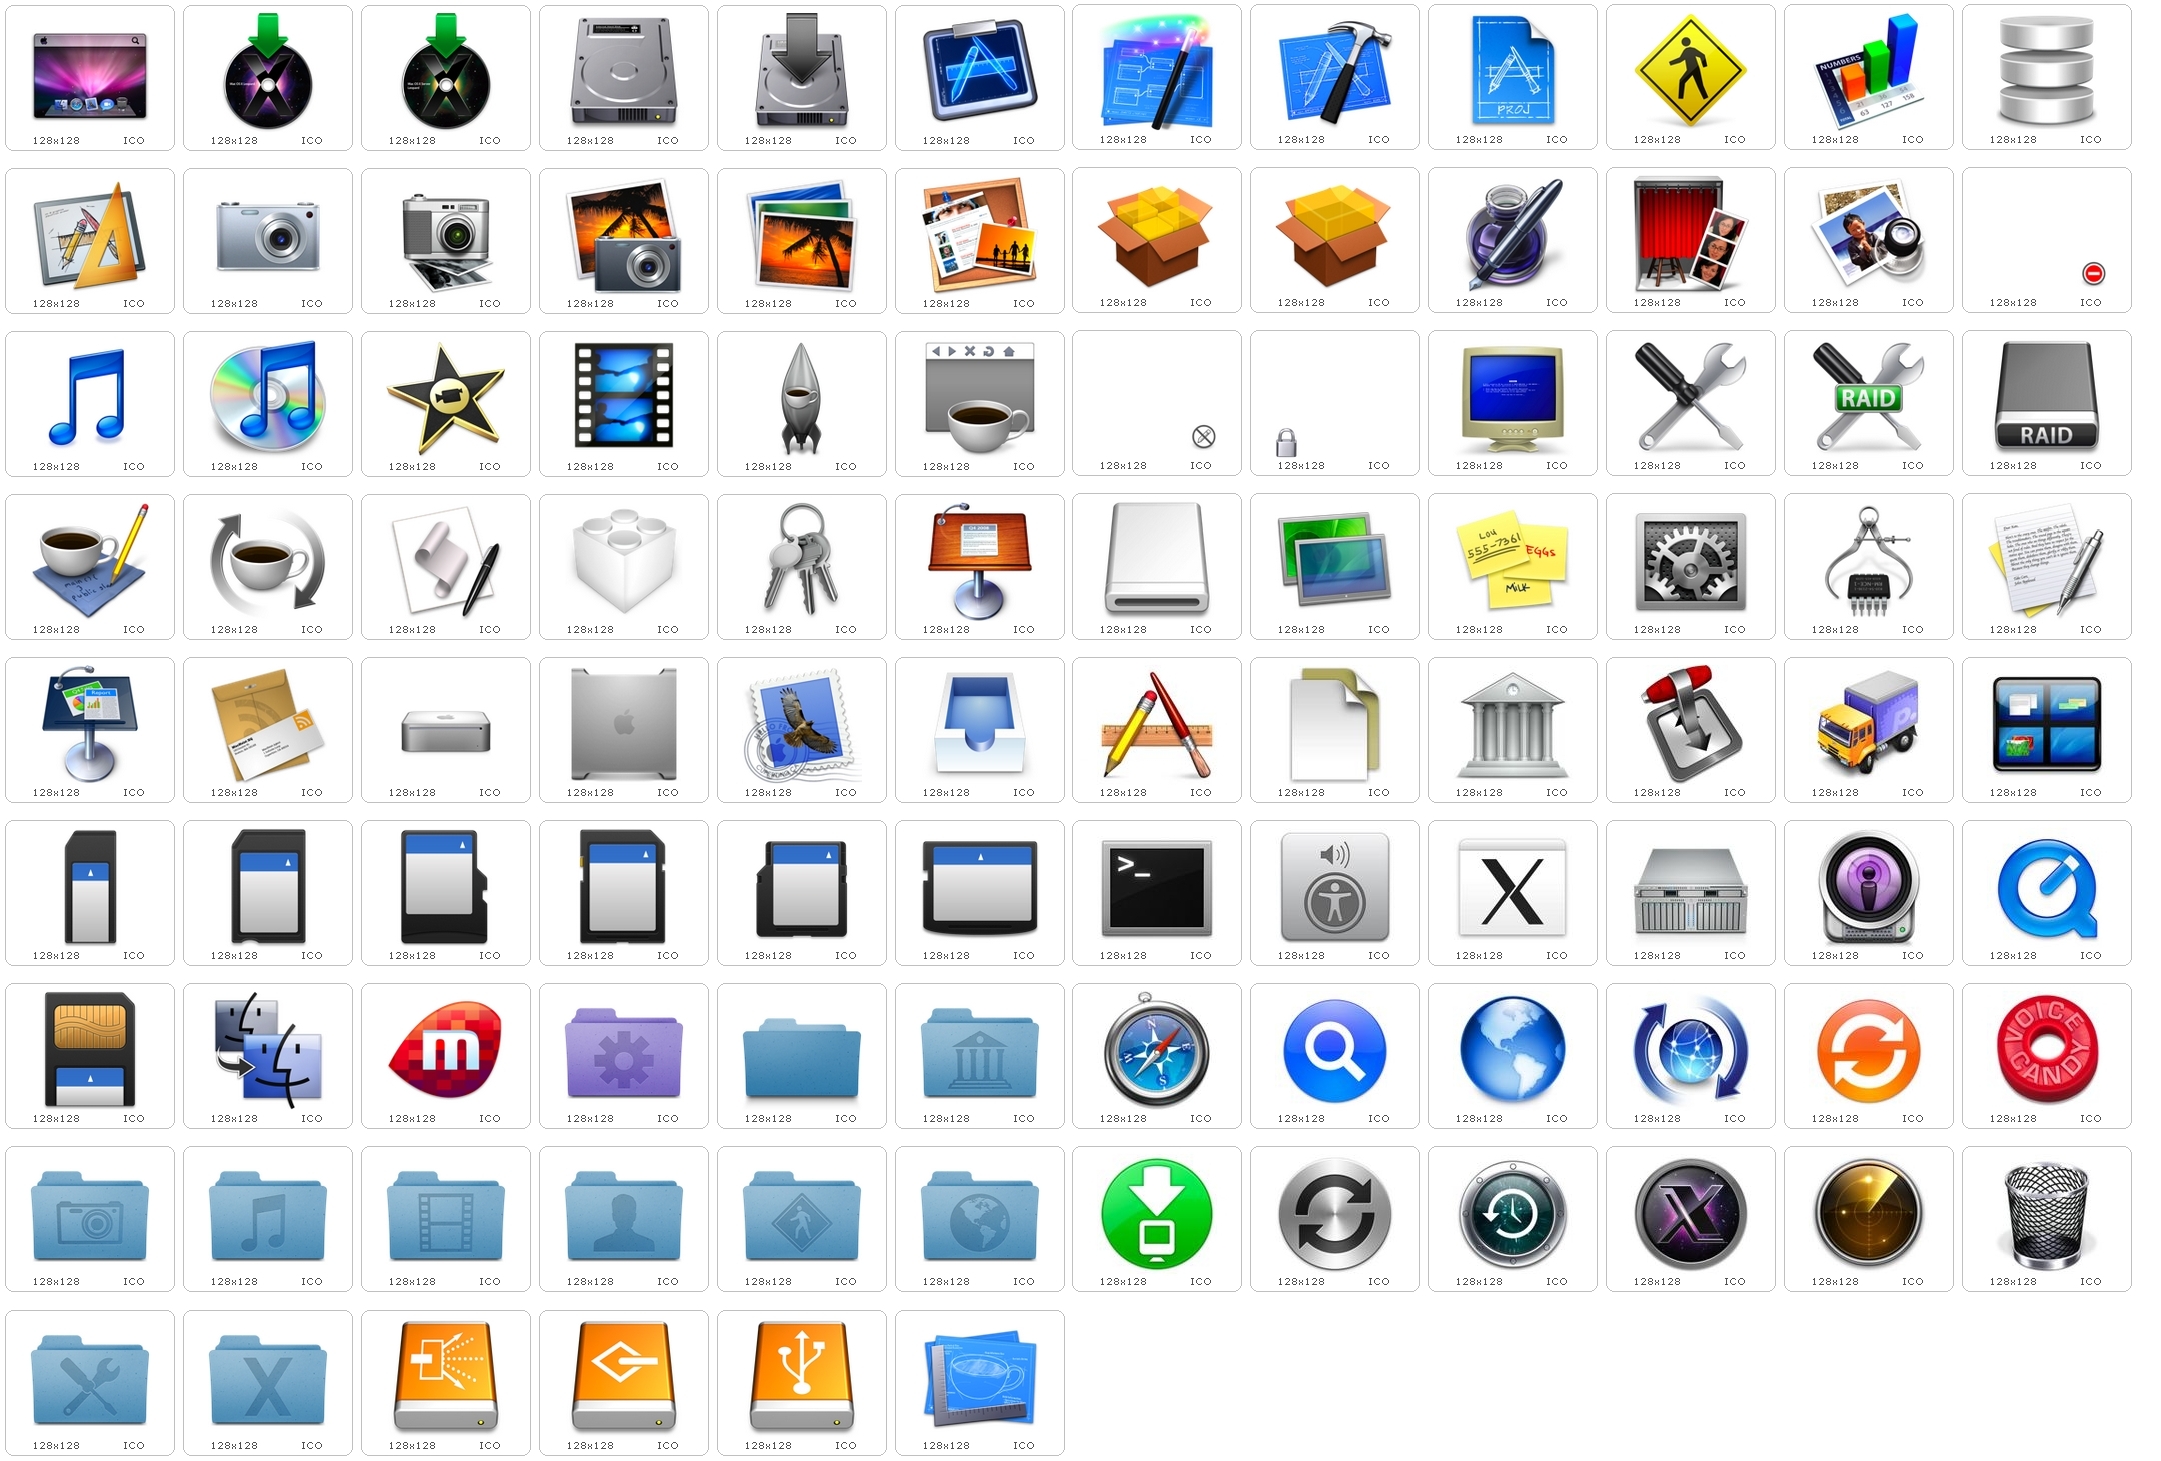 Windows System Icons Download